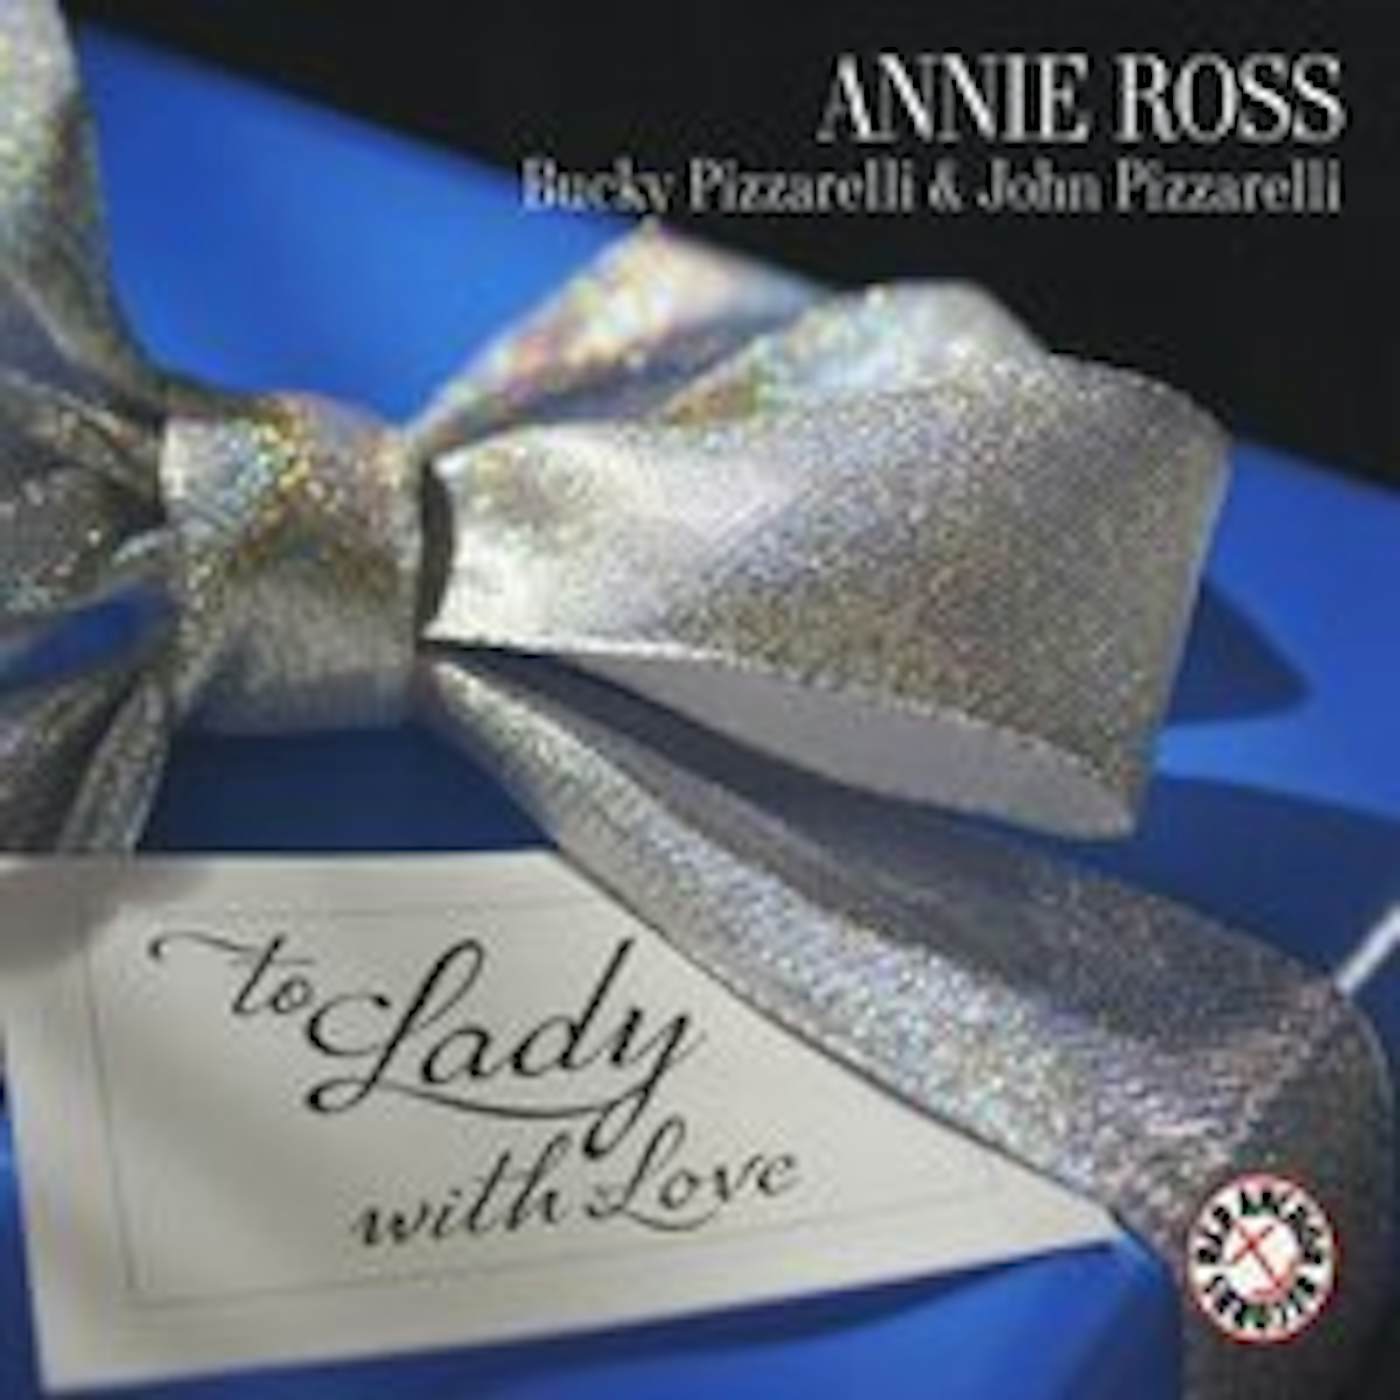 Annie Ross TO LADY WITH LOVE CD